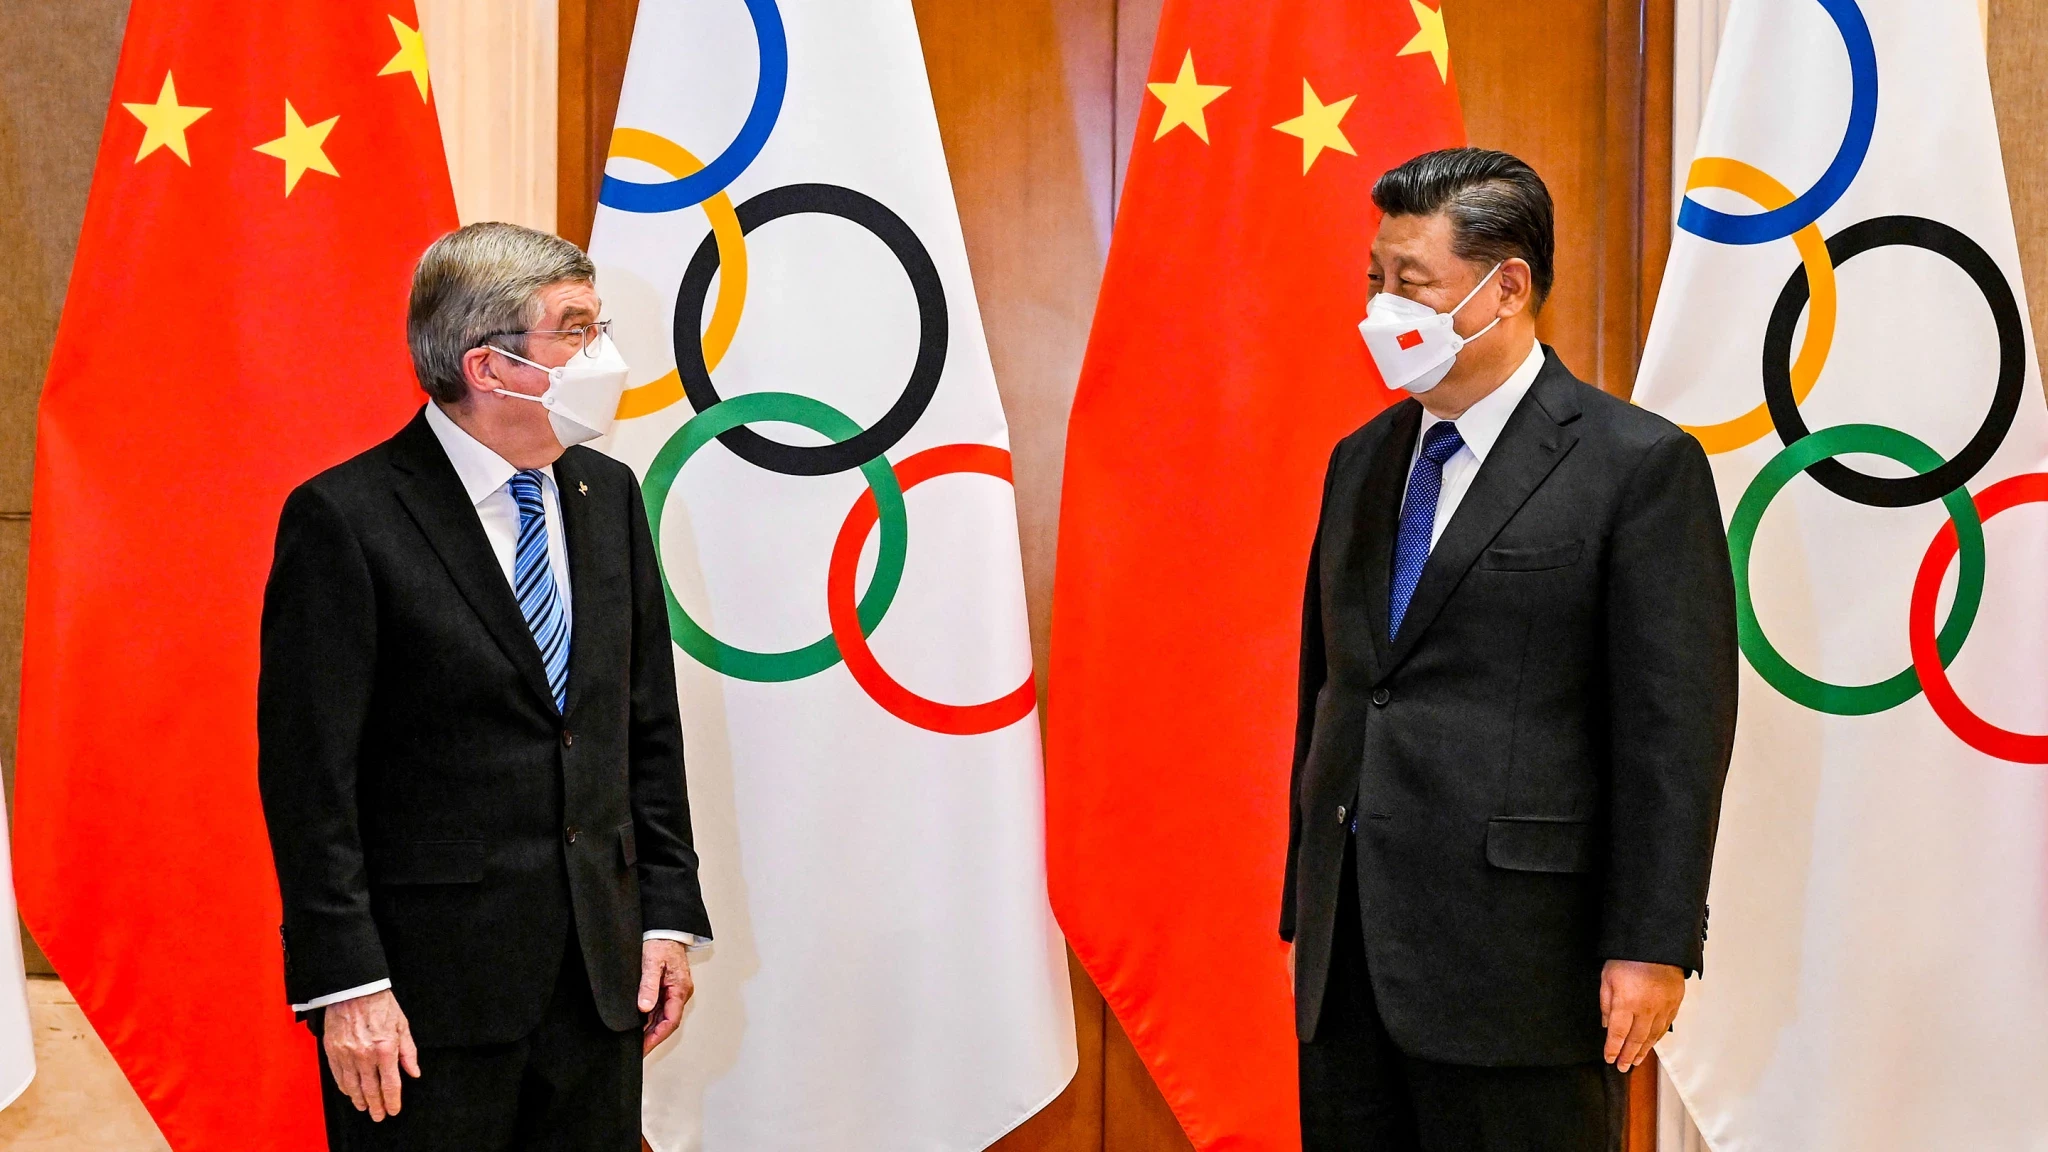 IOC President Thomas Bach met with Chinese President Xi Jinping before the start of the Winter Olympics ©Getty Images